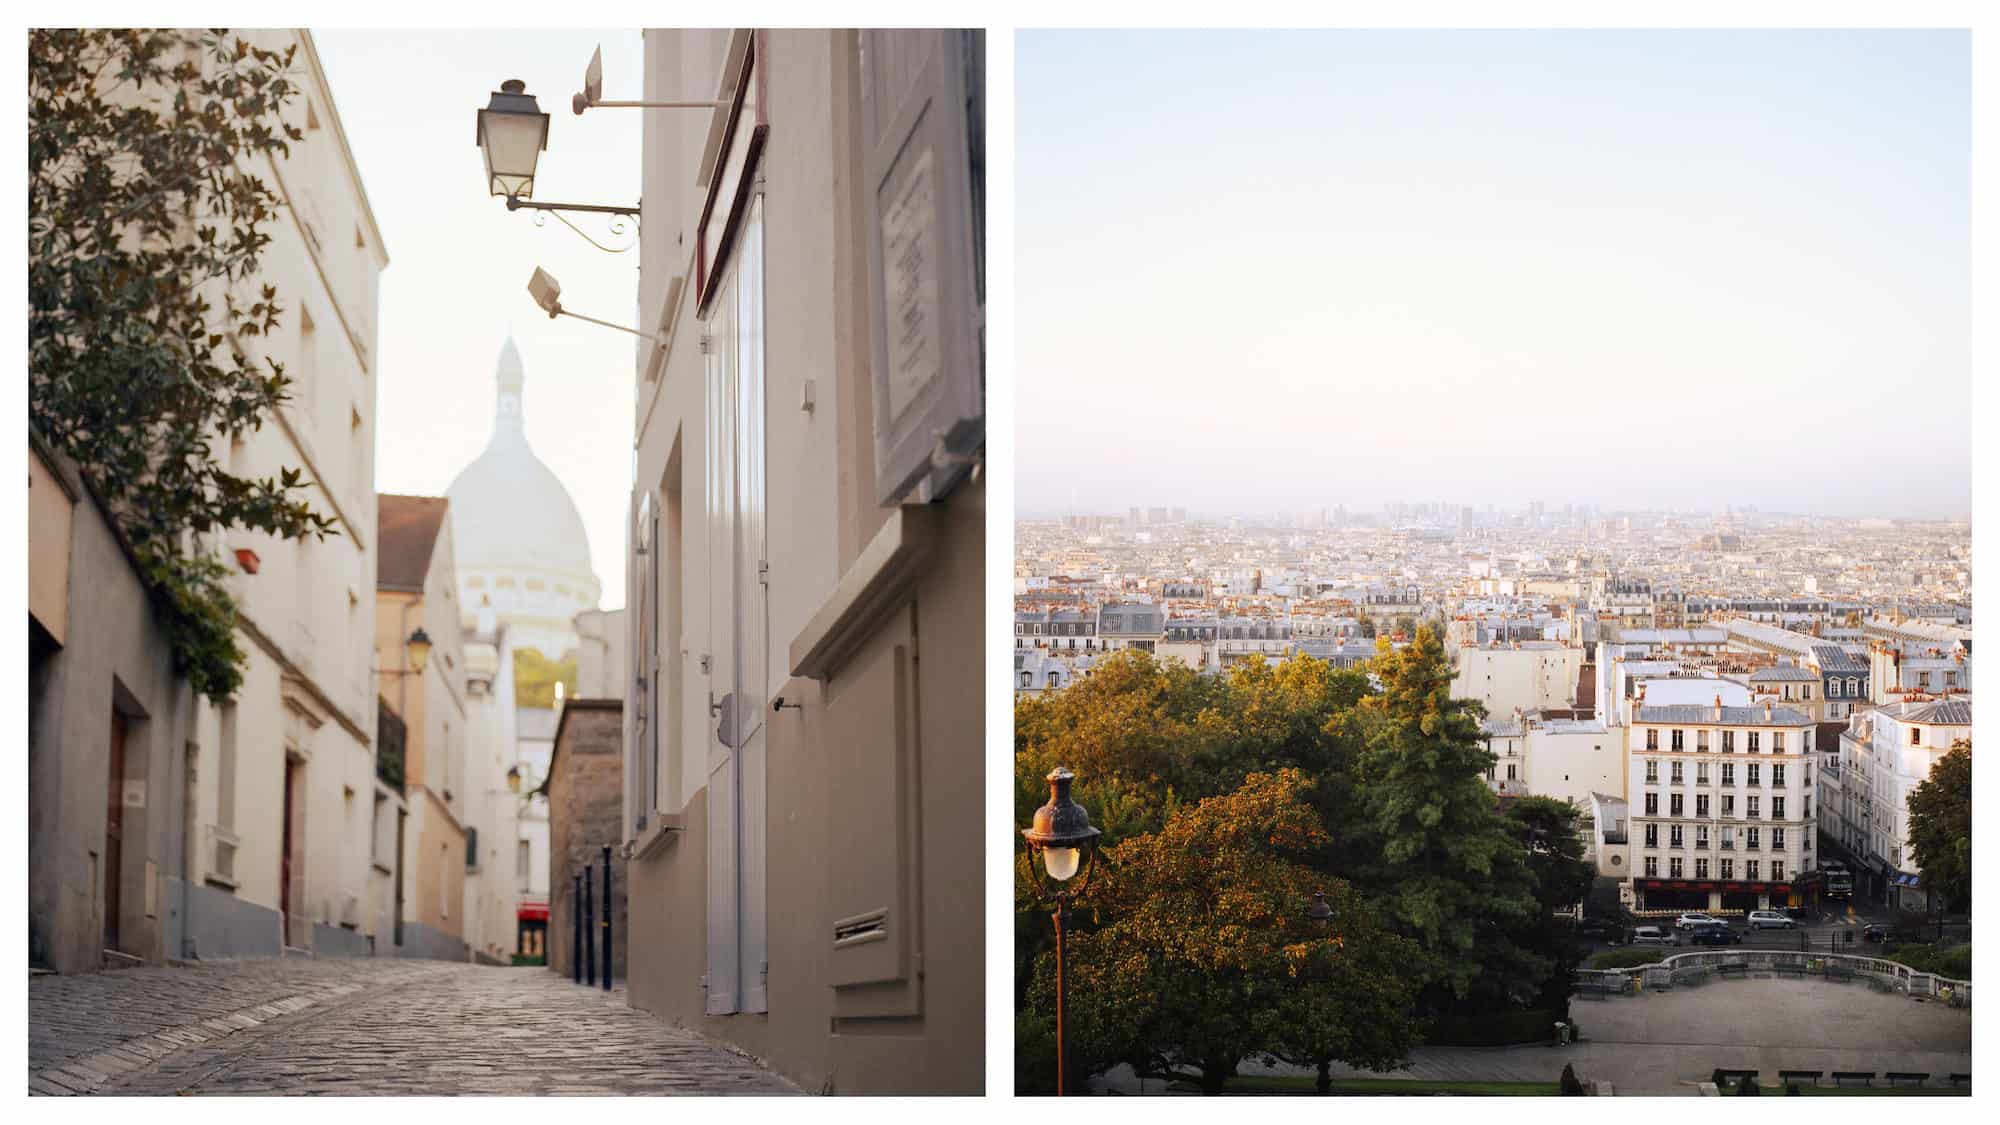 A quiet cobblestone street leading up the the Sacré Coeur Basilica in Montmartre, Paris (left). A panoramic view of the Paris rooftops from the Sacré Coeur in Montmartre (right).